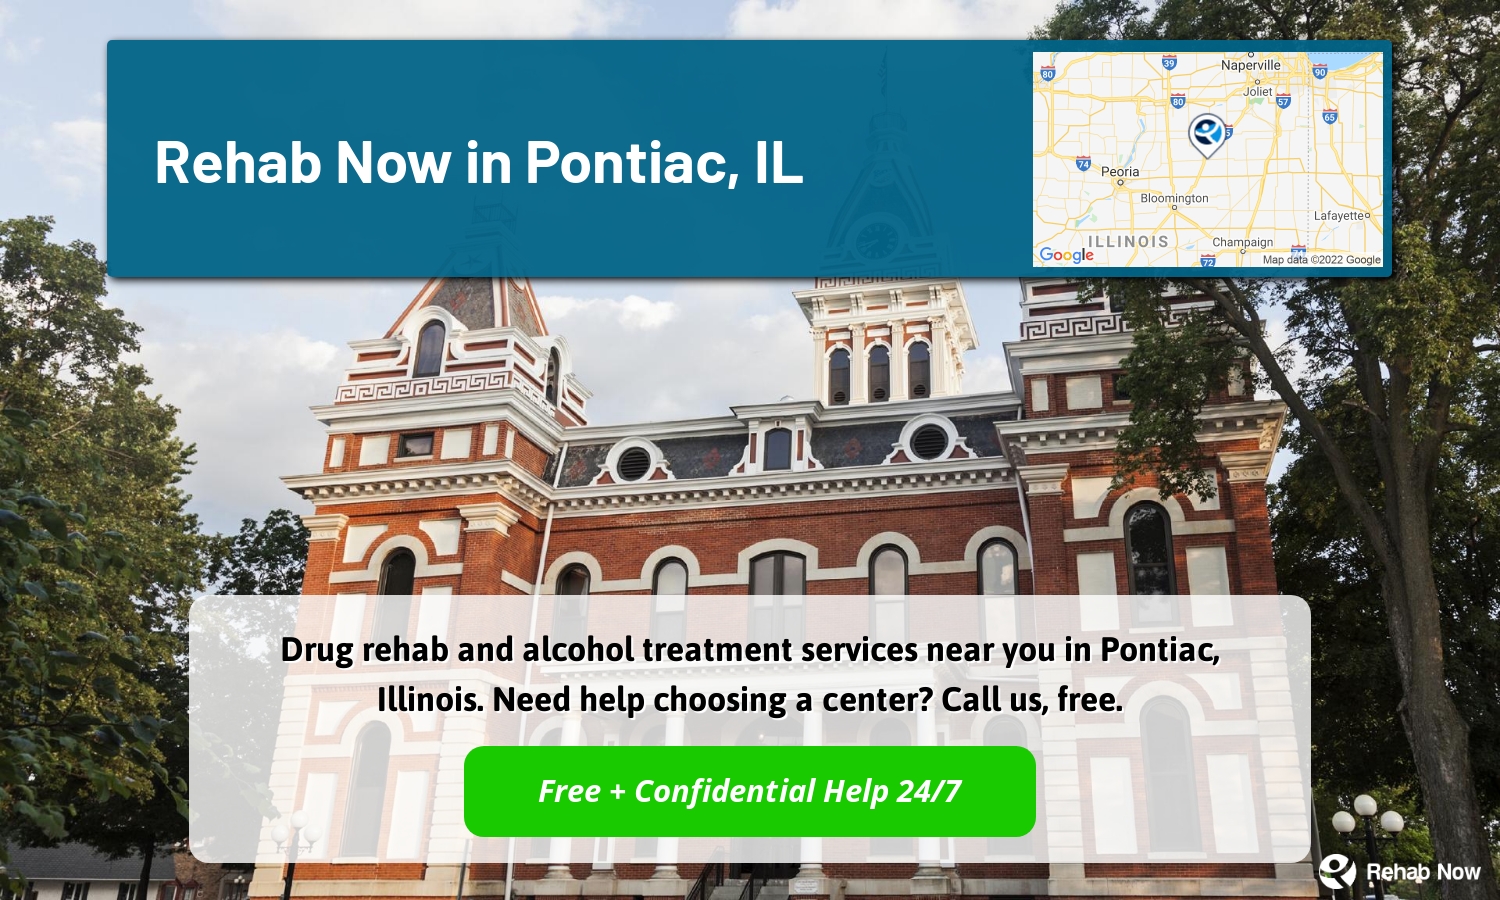 Drug rehab and alcohol treatment services near you in Pontiac, Illinois. Need help choosing a center? Call us, free.